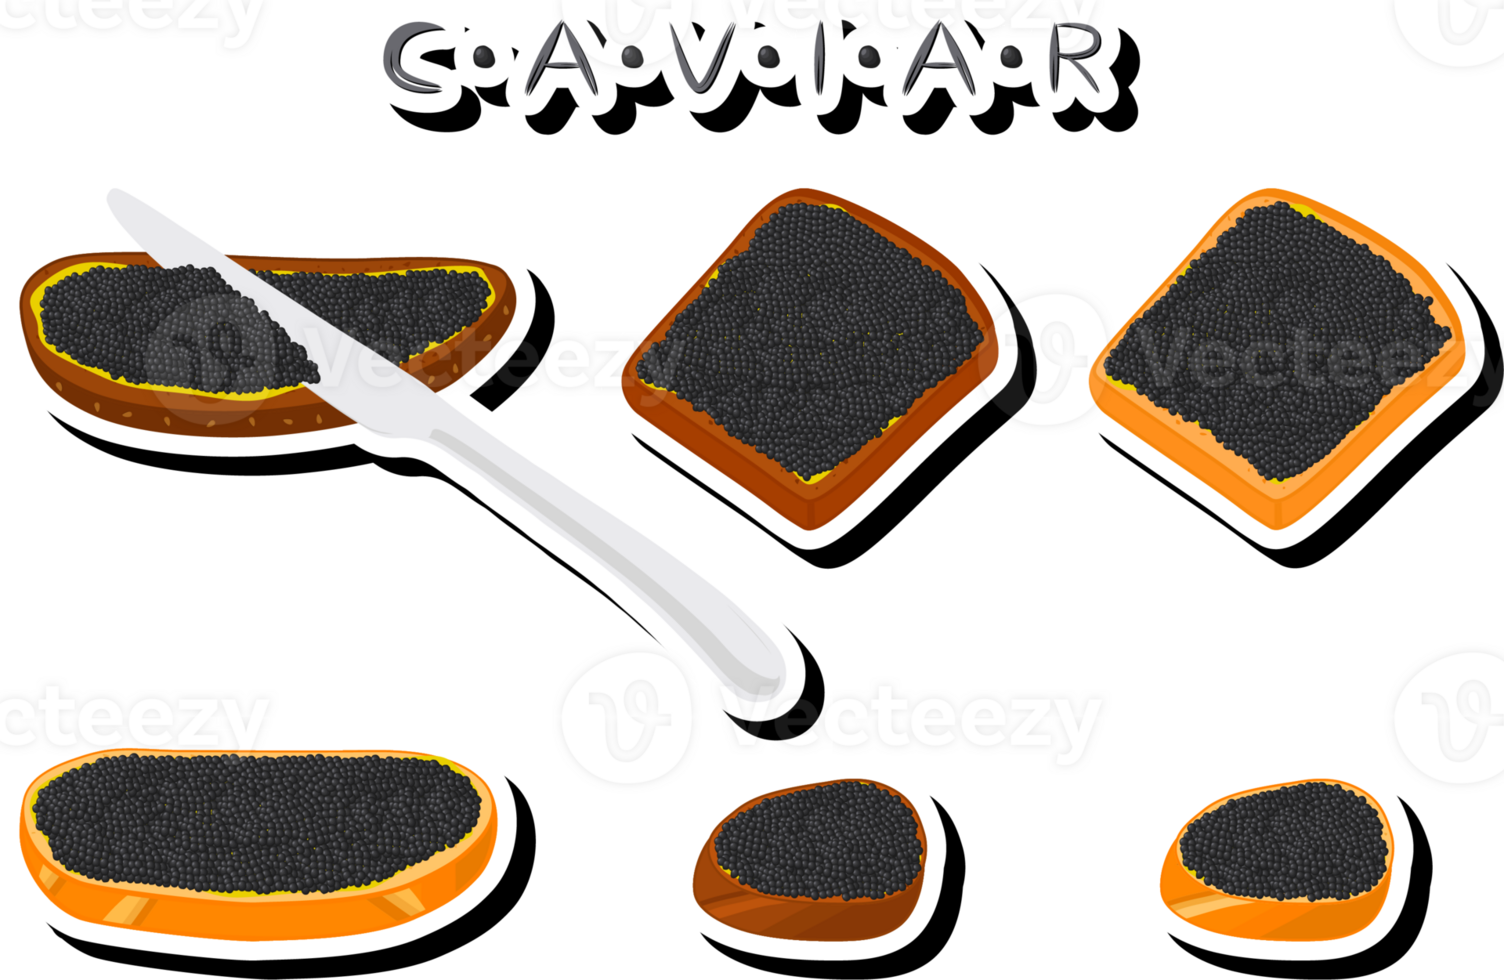 big set various types fish caviar, bread different size png